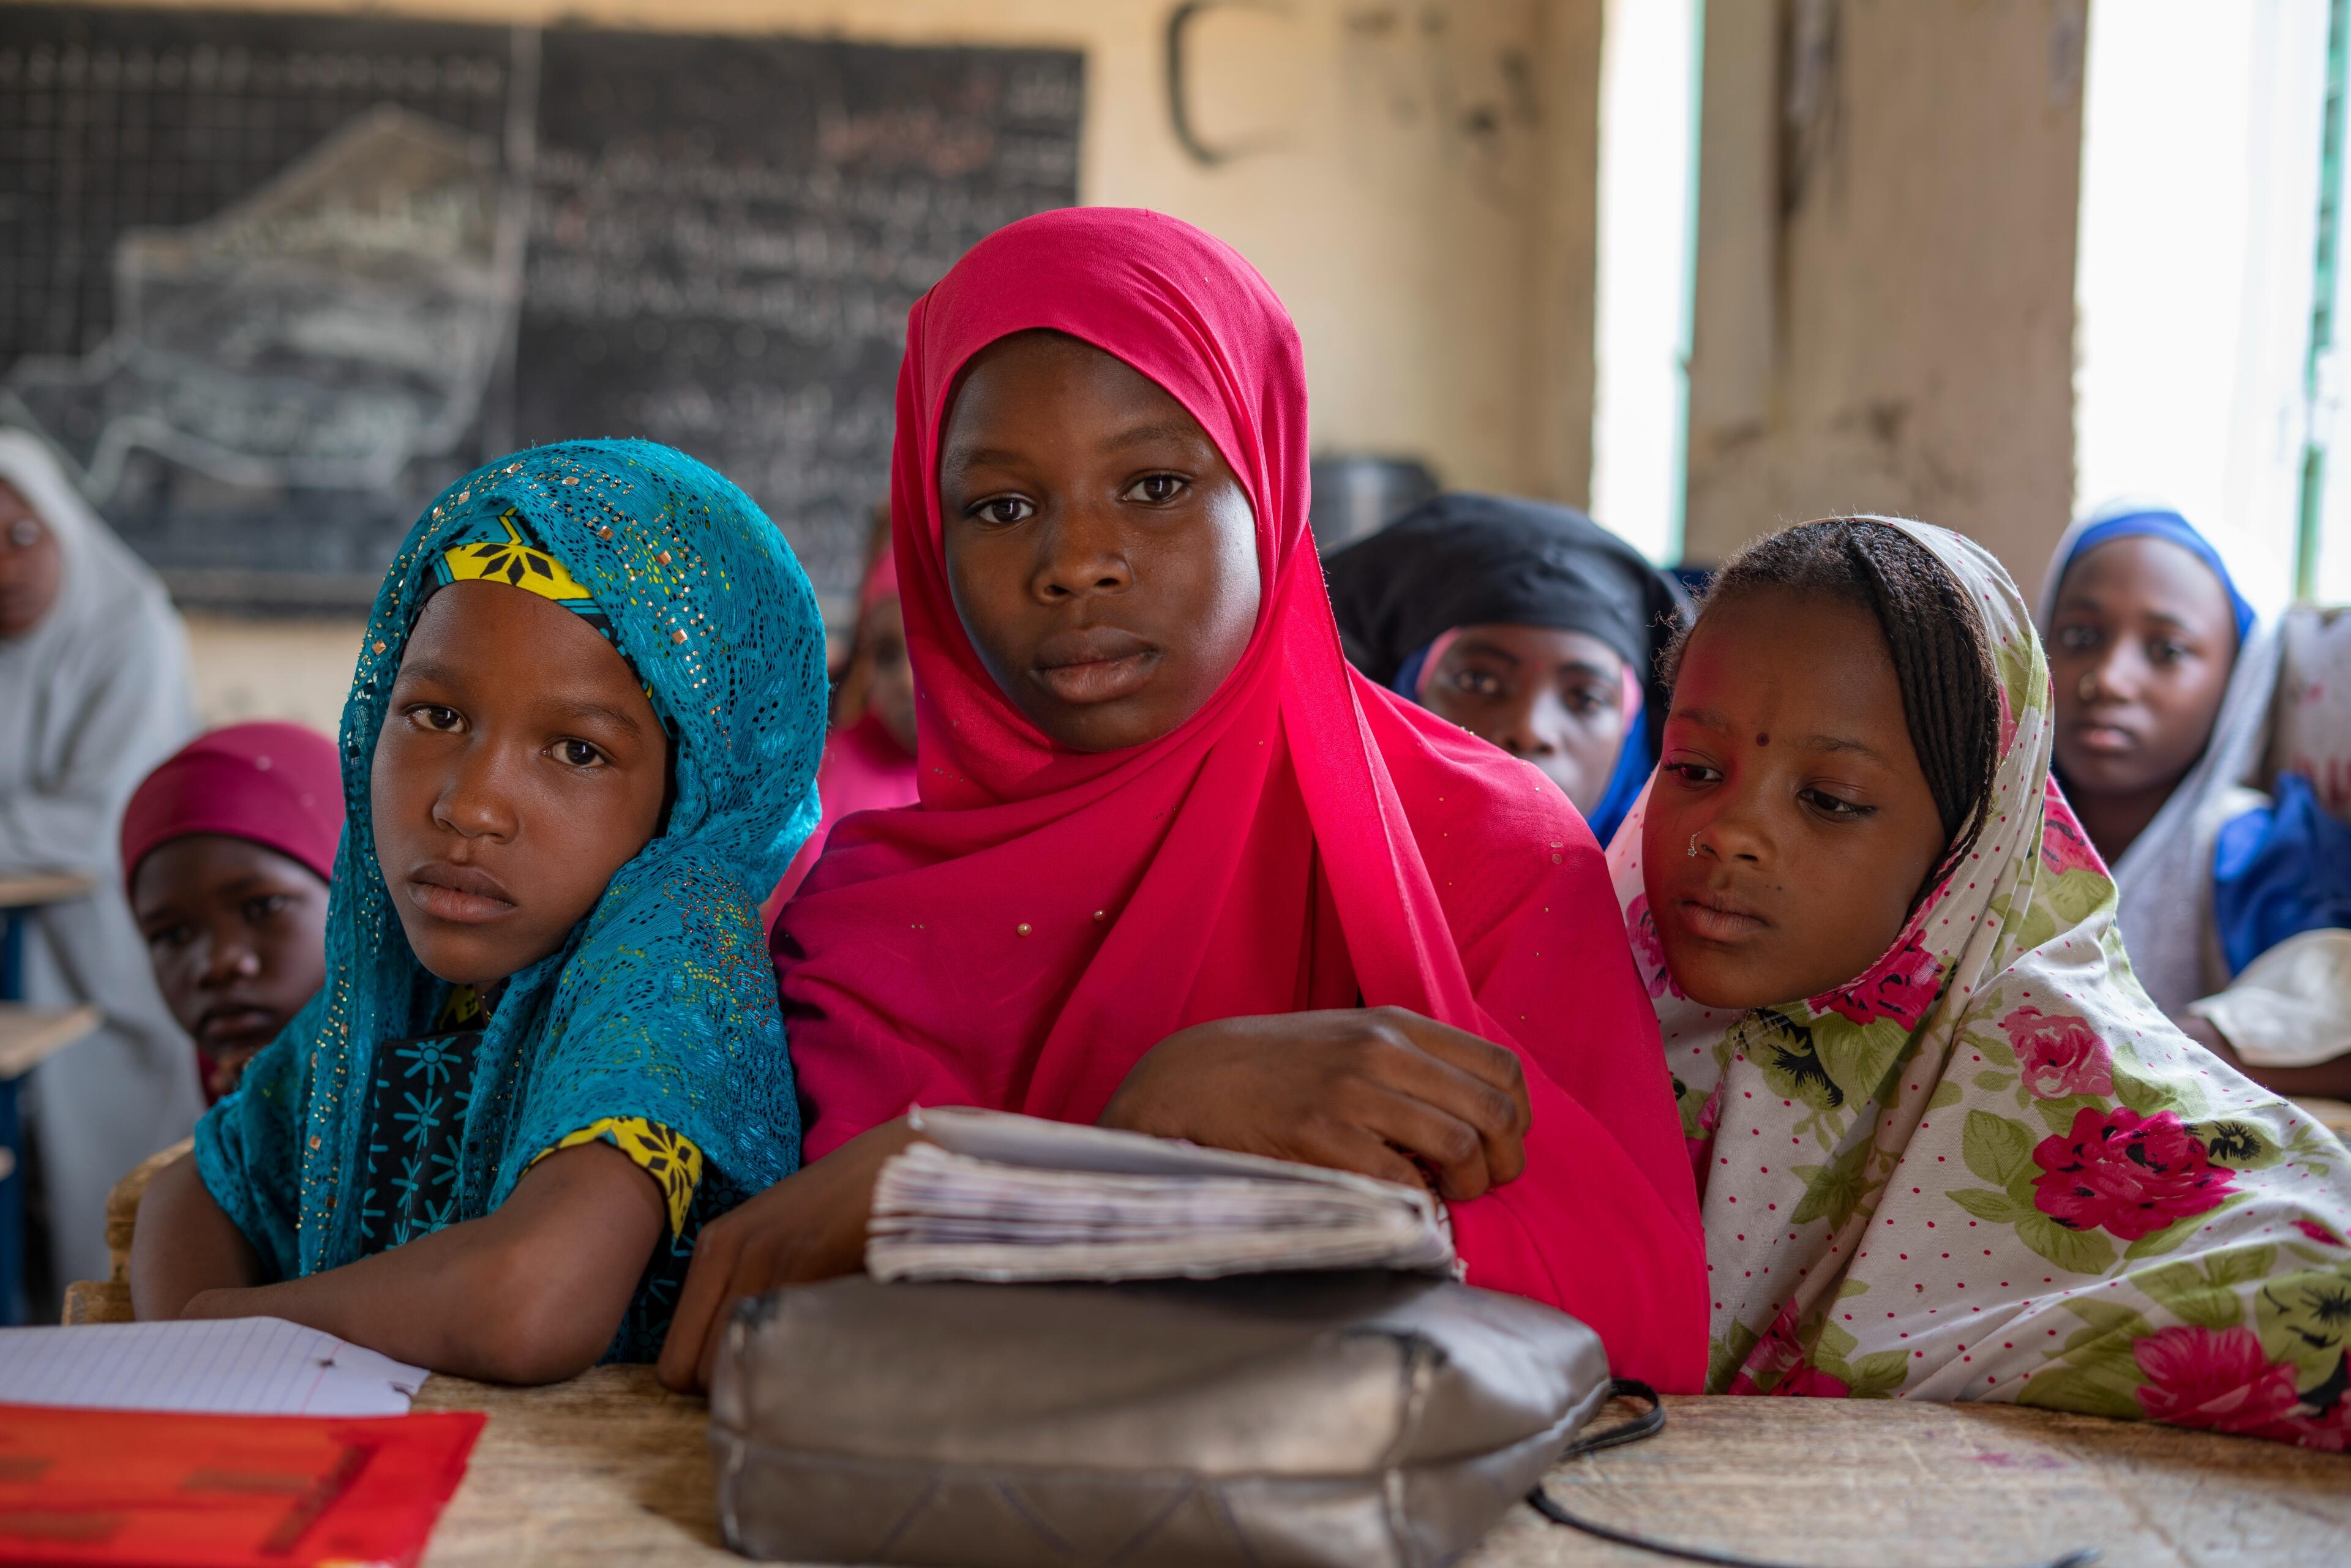 Fifteen-year-old Maryama sits with a serious expression at a school desk with two friends. A school book and papers are on the desk in front of the girls.